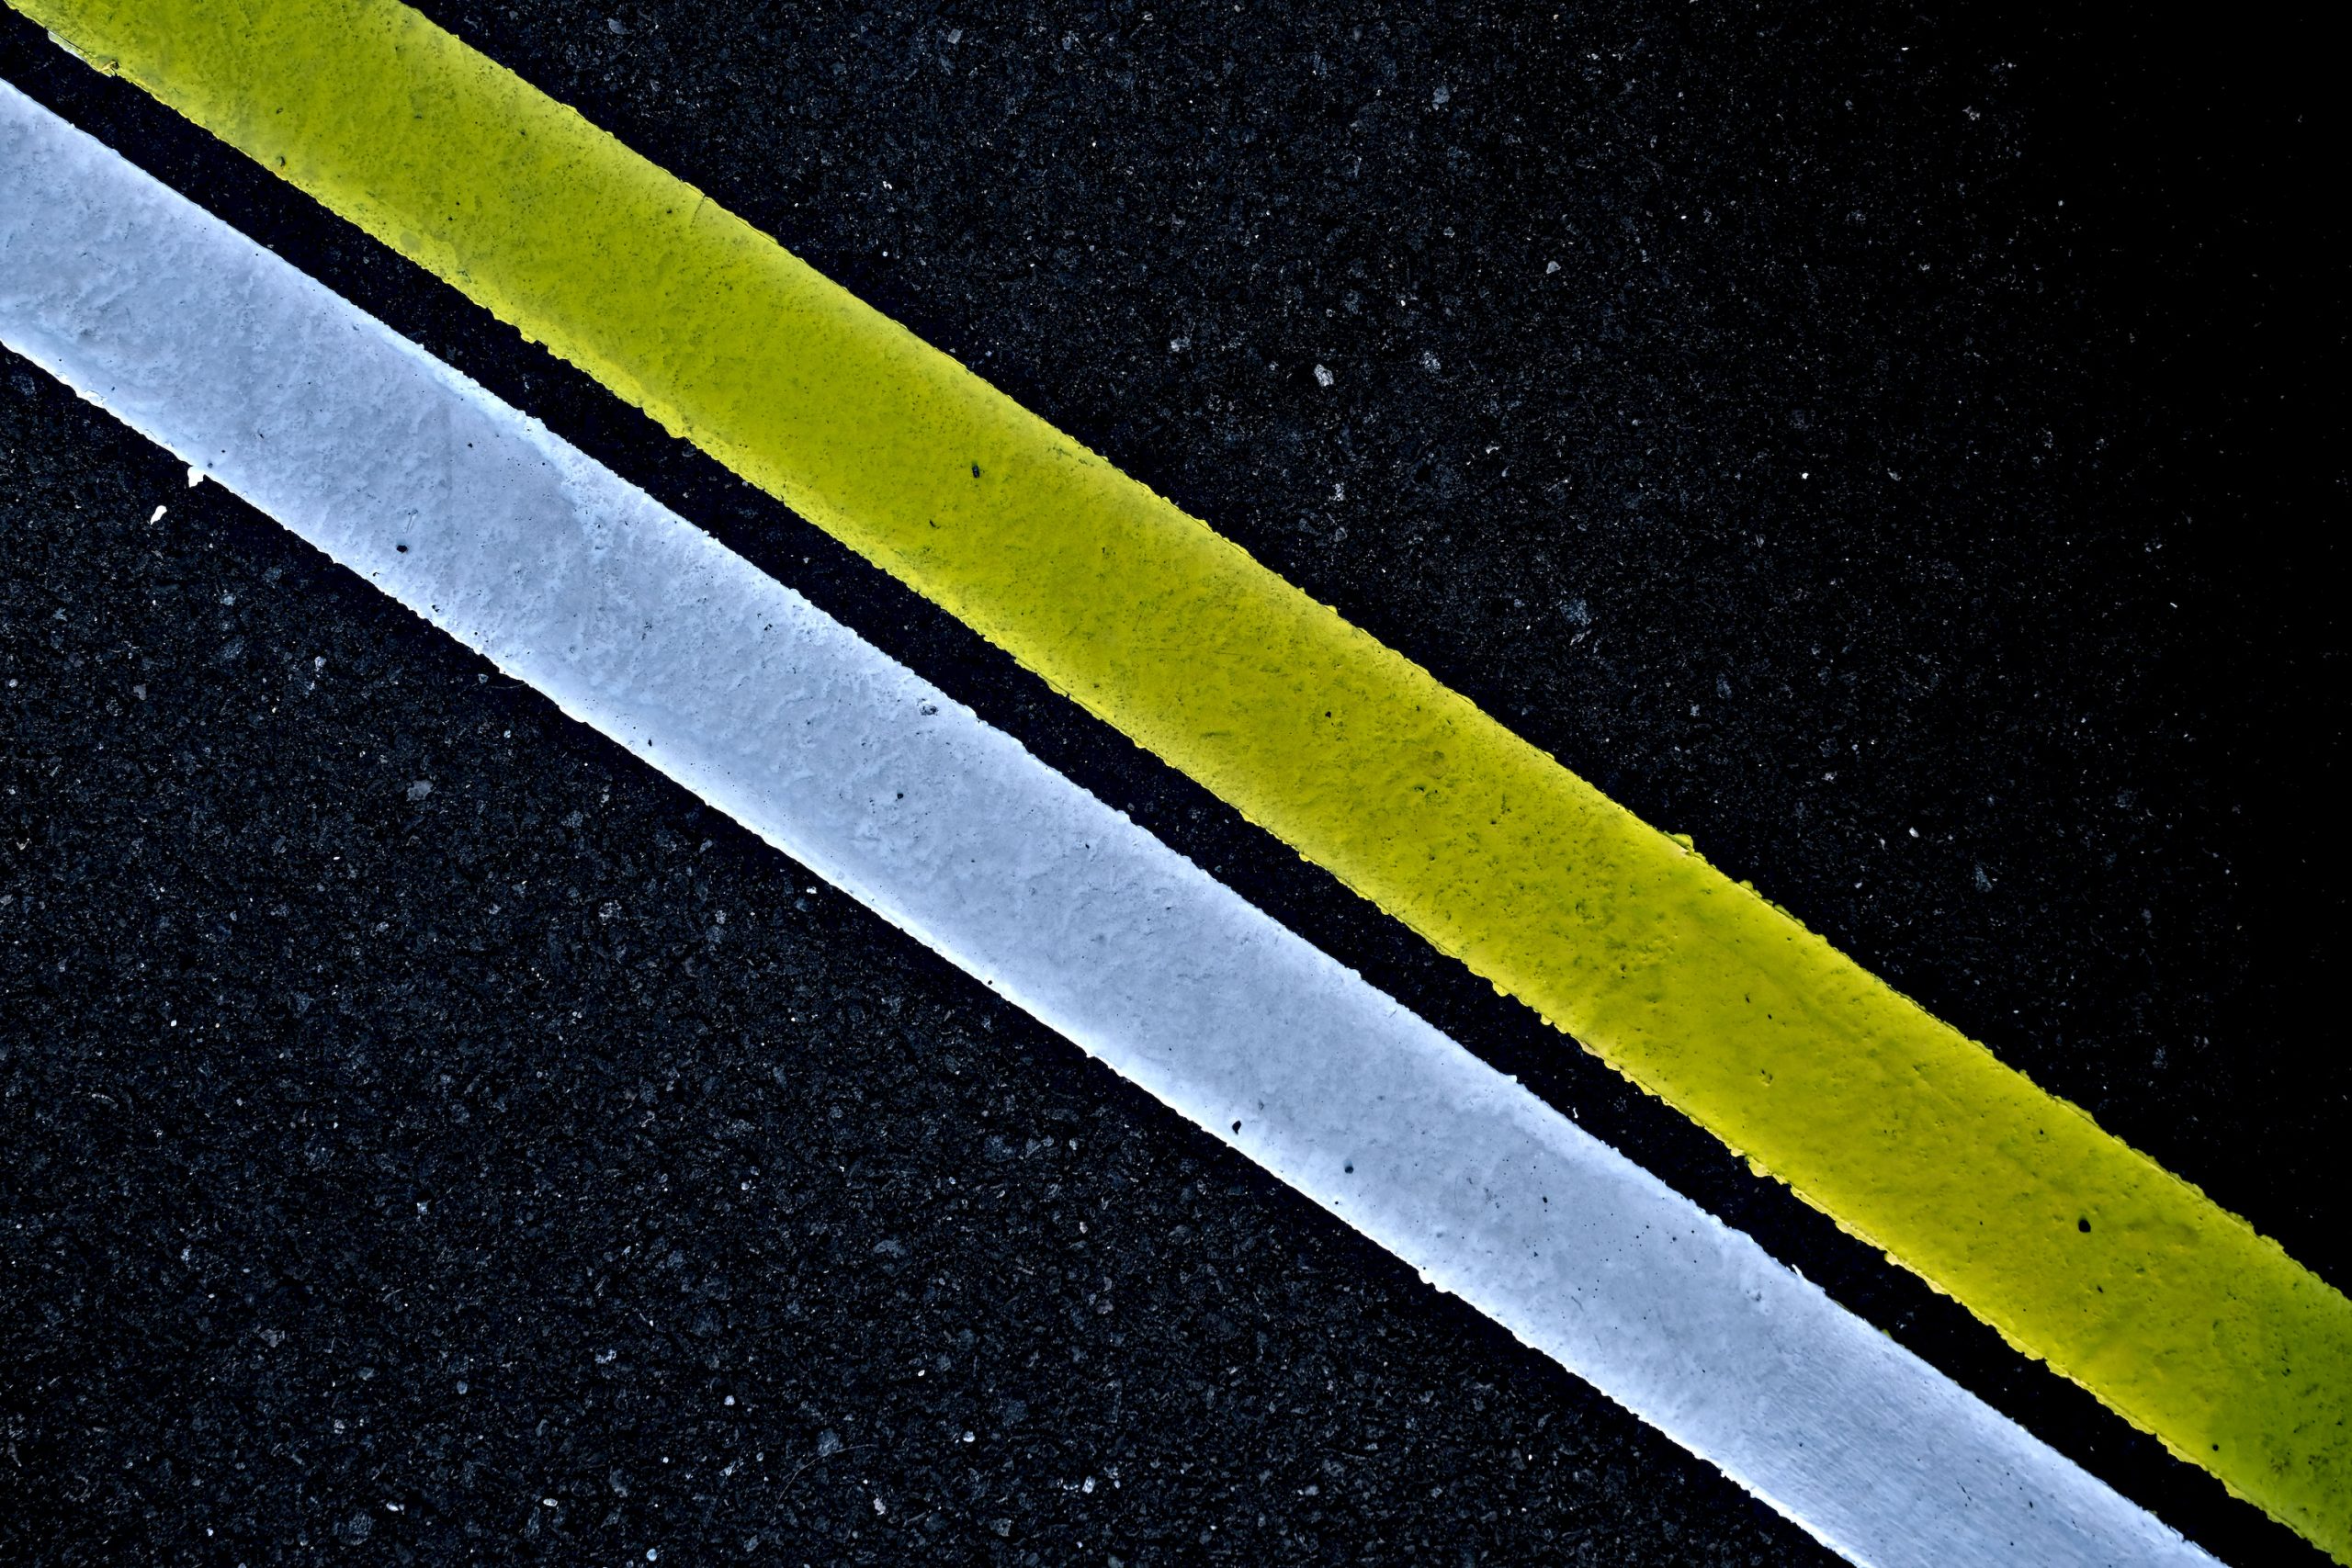 Review of light emitting lane demarcation technologies shutterstock 1940570143 scaled Review of Light-Emitting Lane Demarcation Technologies 33